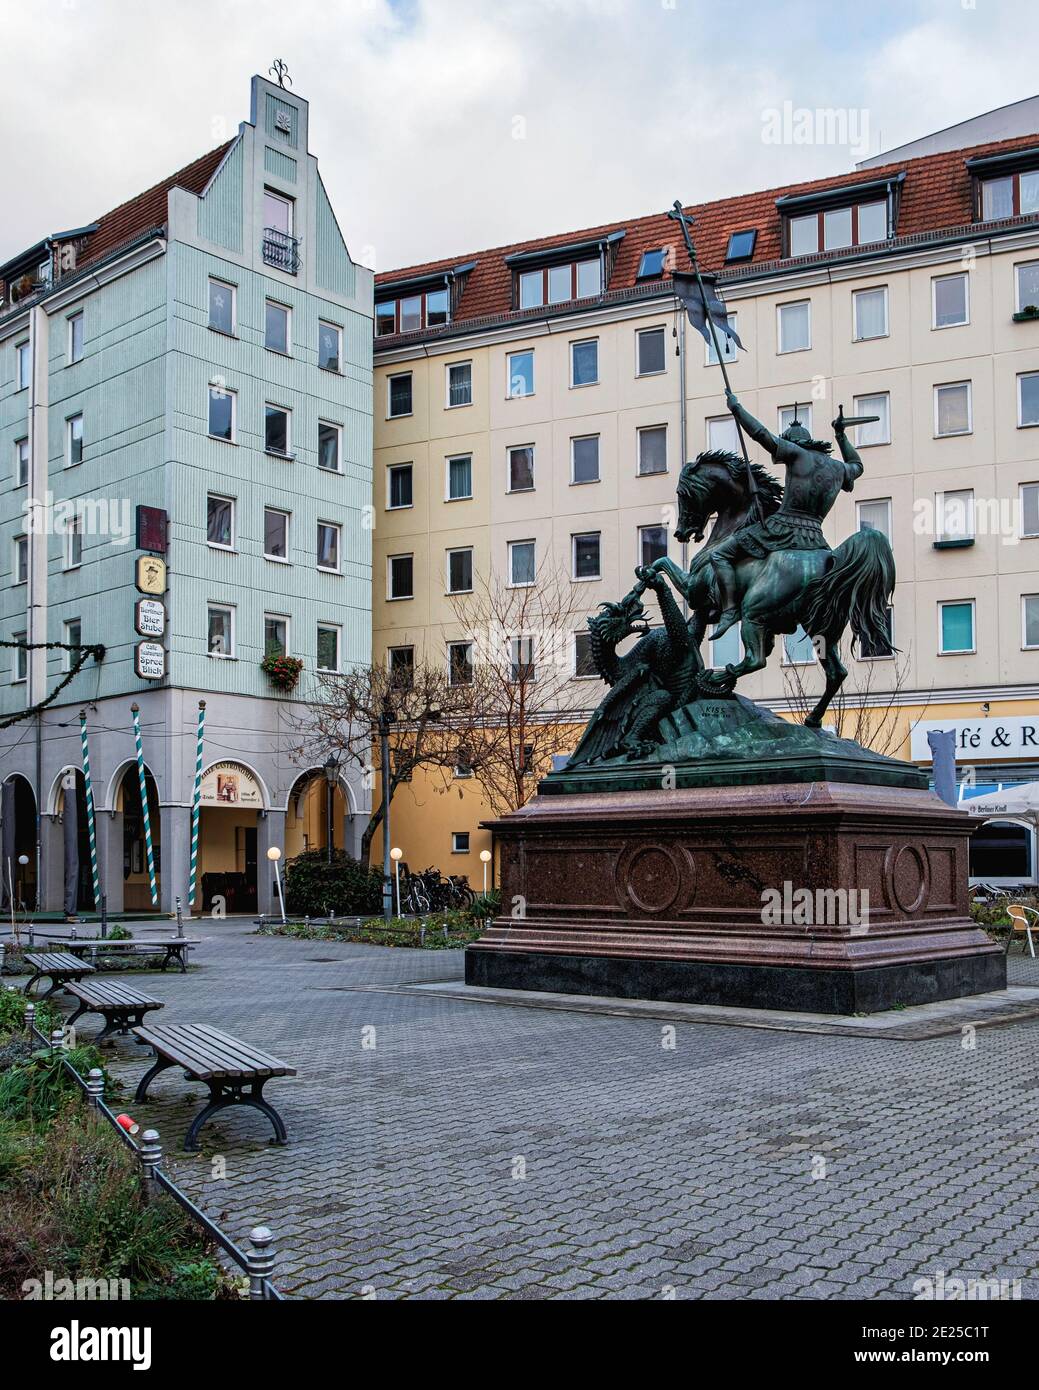 Saint George and the dragon, bronze sculpture in historic old town in Nikolaiviertel, Mitte, Berlin, Germany Stock Photo